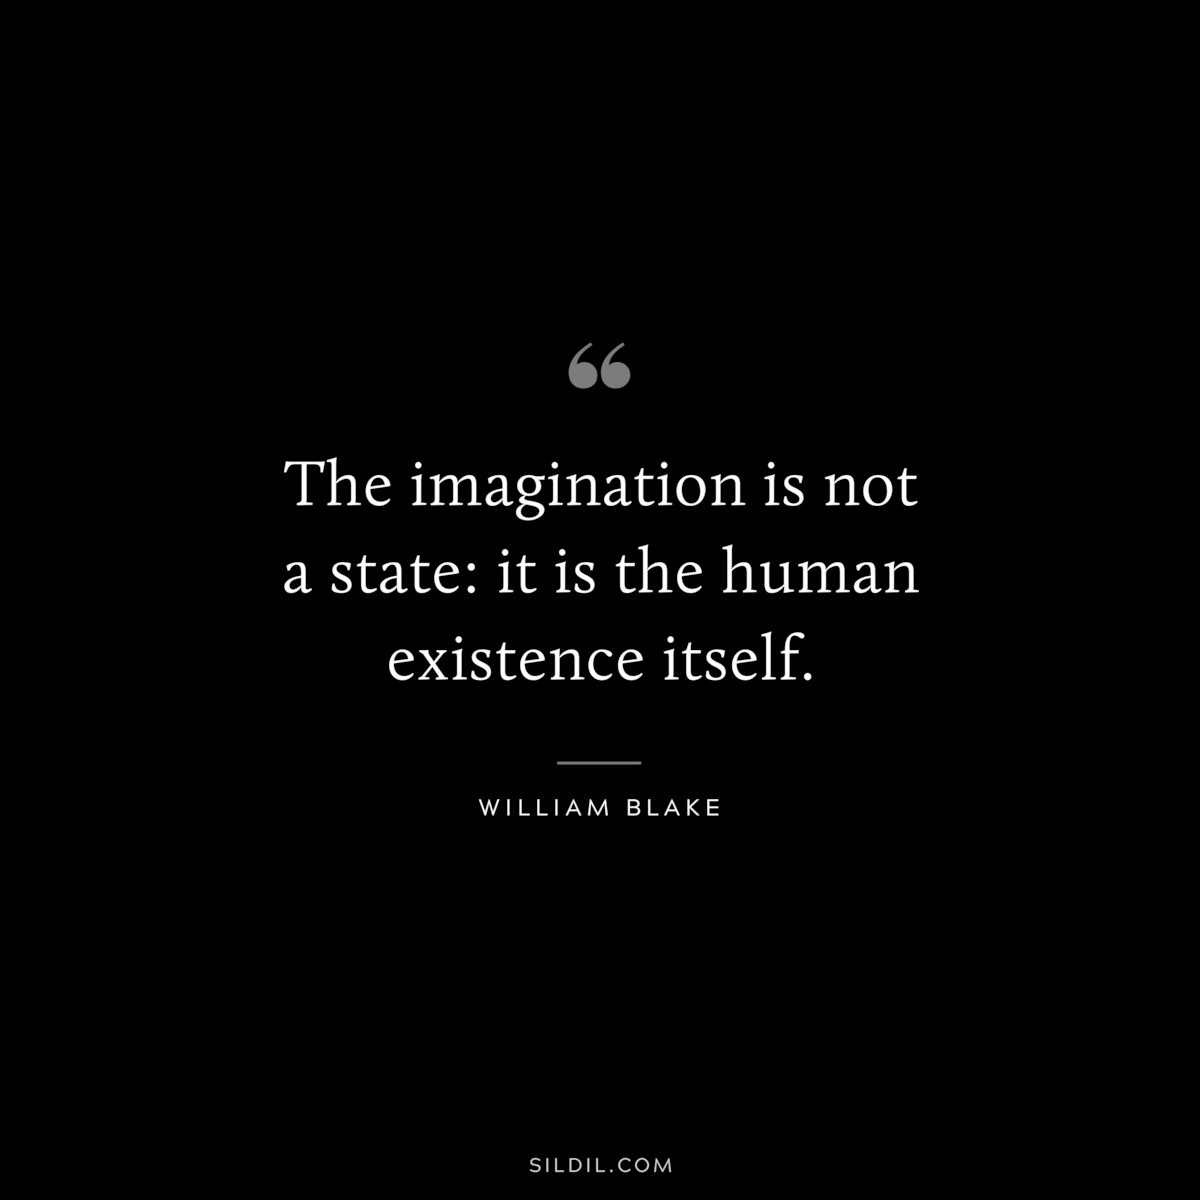 The imagination is not a state: it is the human existence itself. ― William Blake